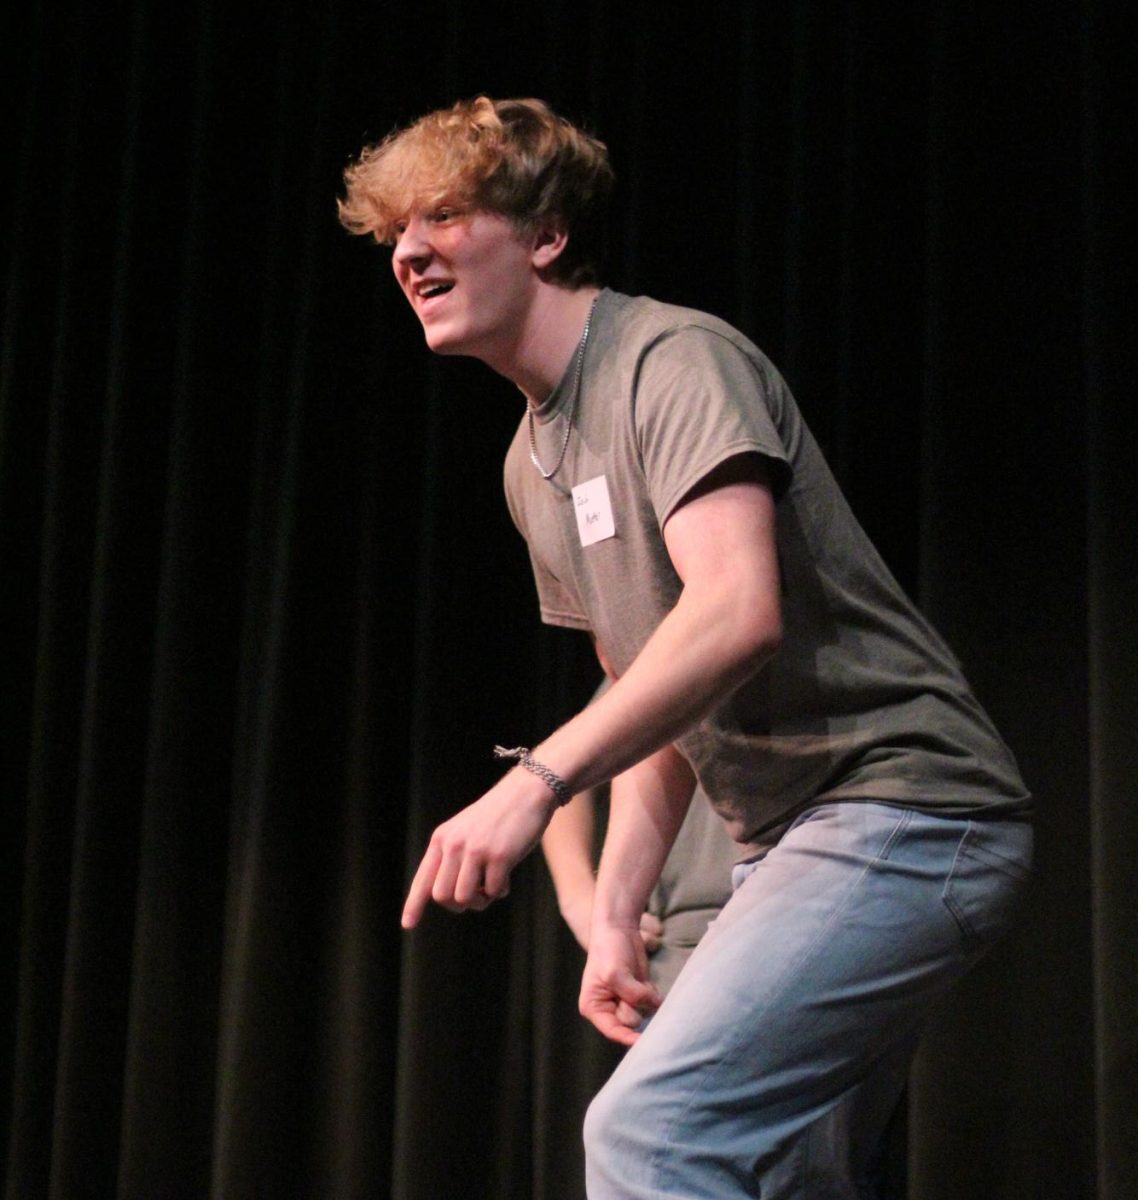 Recent graduate (Class of 2023) and former improv member Zach Moeller performs at Silver Platter, an improv event hosted by Southwest in the 2022-23 school year. The Improv Club met for the first time this year on Tuesday. Aug. 29.